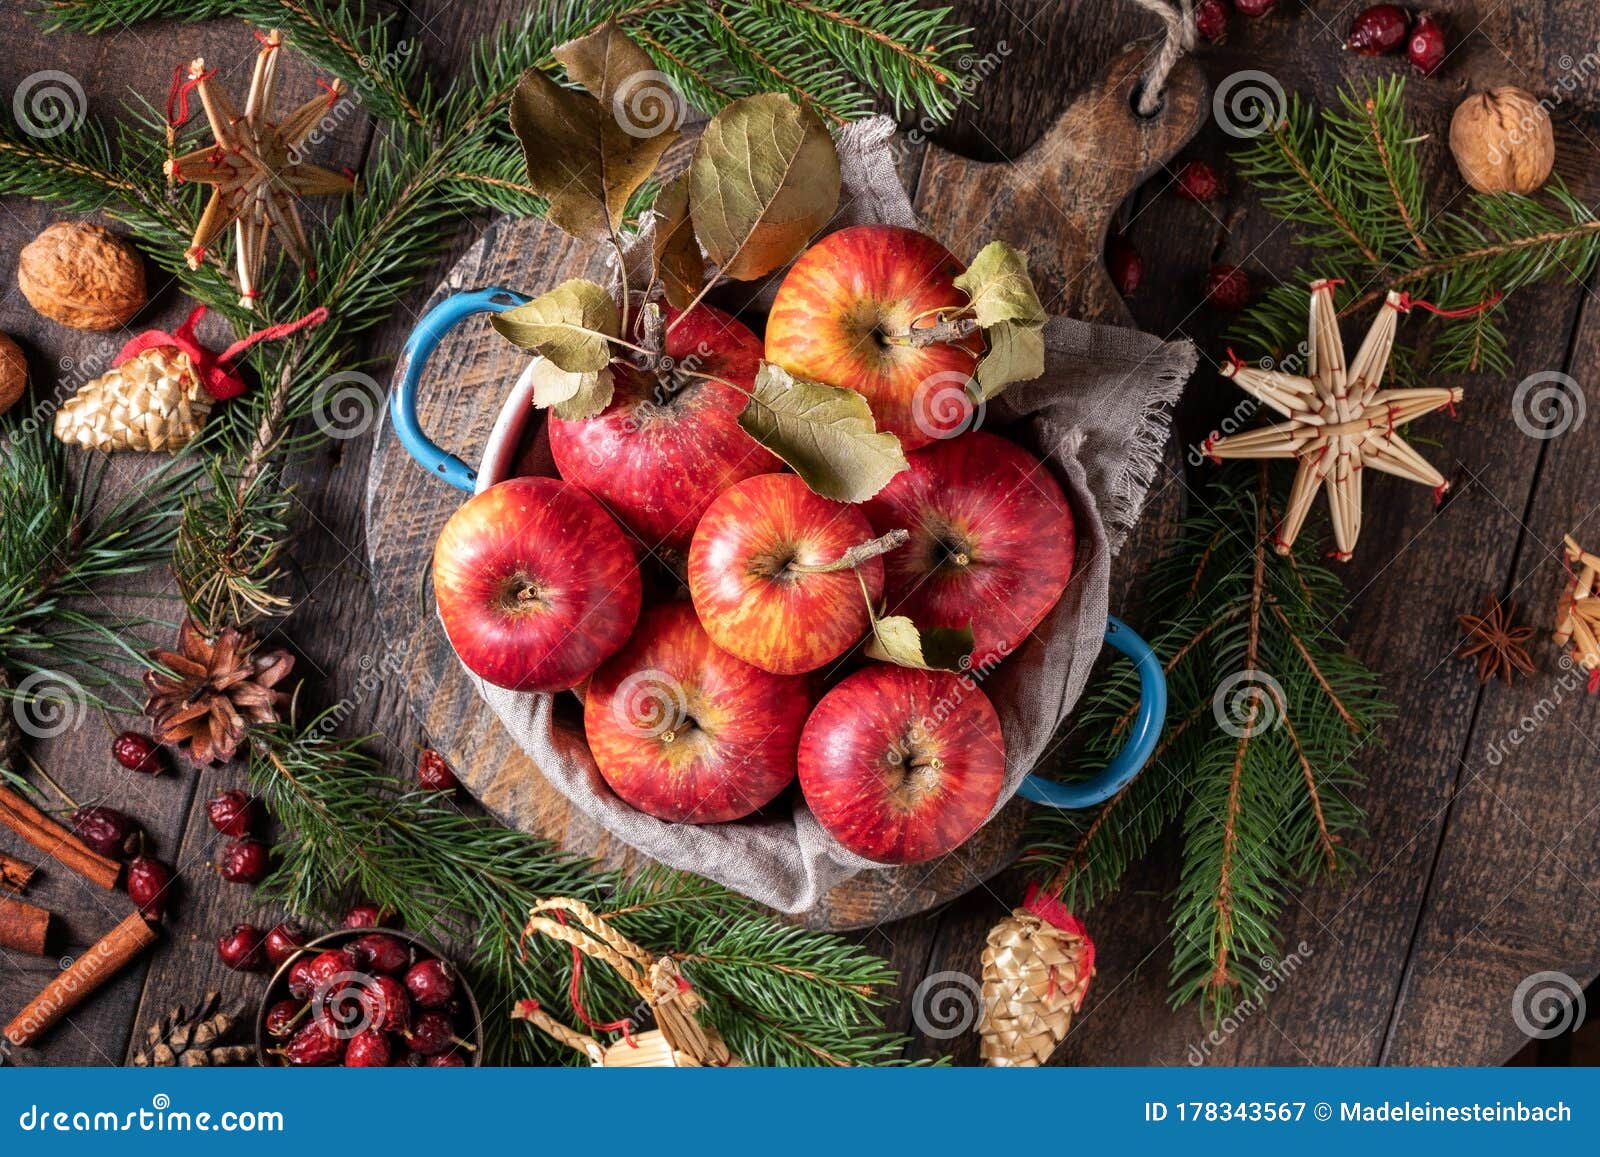 Fresh Apples with Christmas Decoration Stock Image - Image of leaf ...